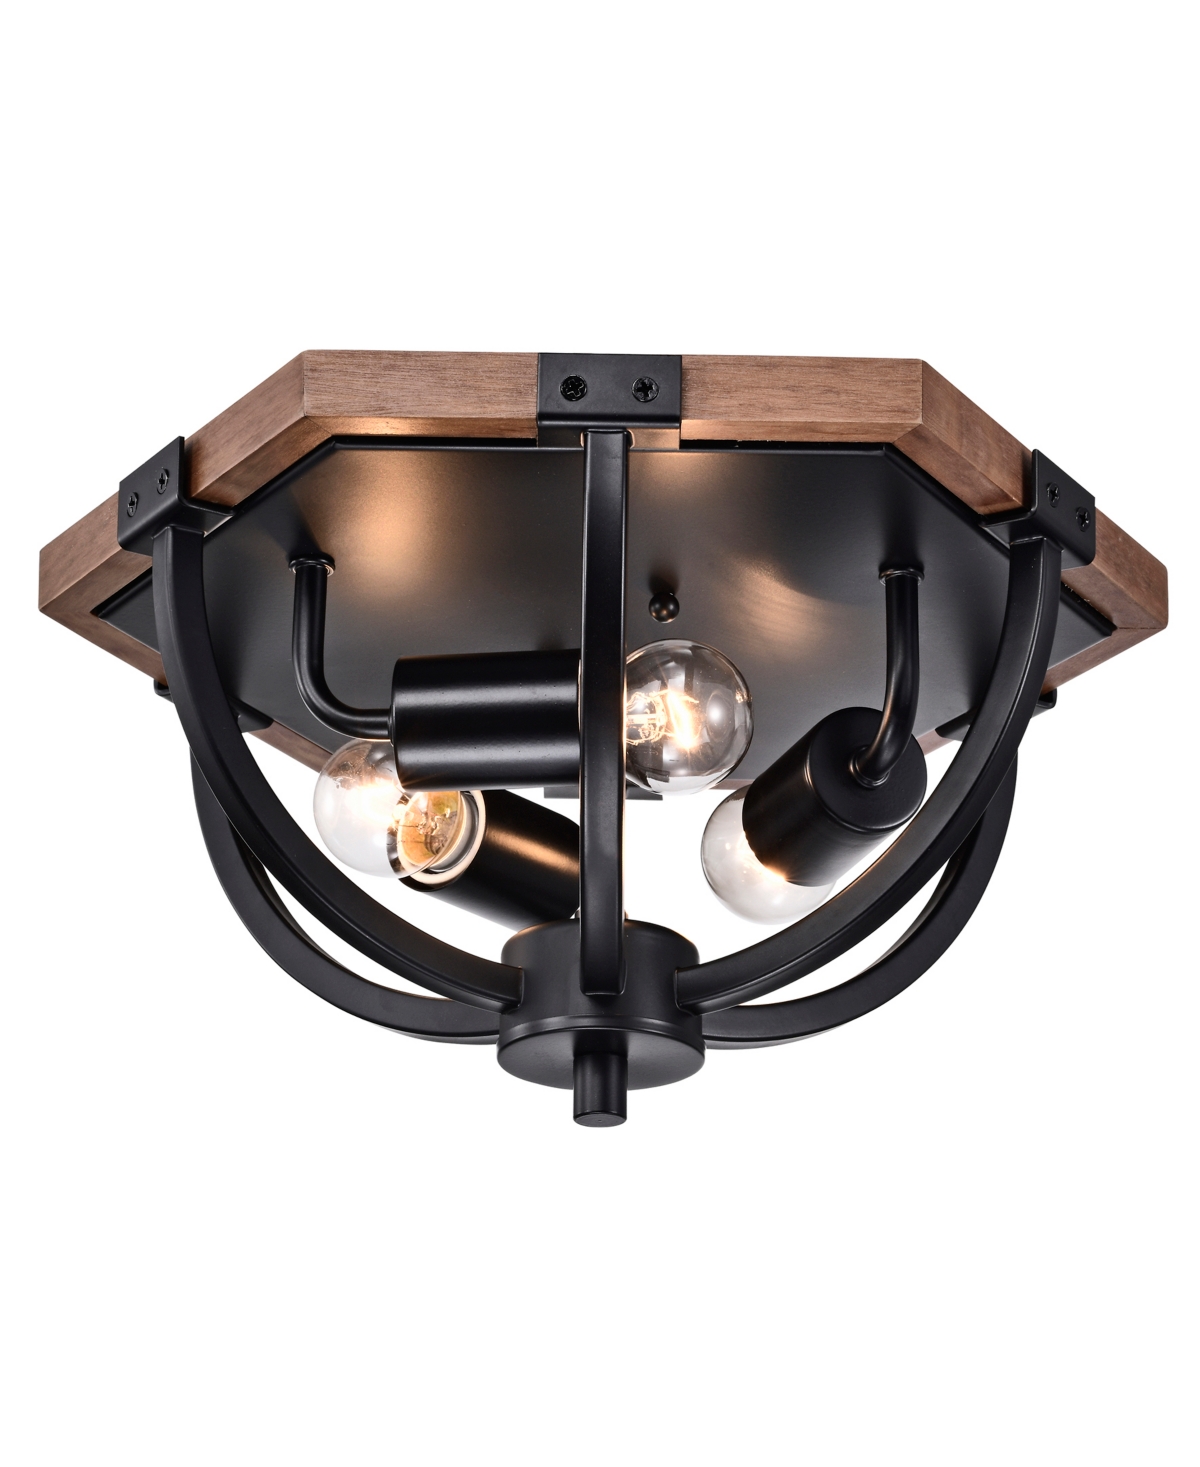 Home Accessories Fiona 12" 3-light Indoor Flush Mount With Light Kit In Matte Black And Faux Wood Grain